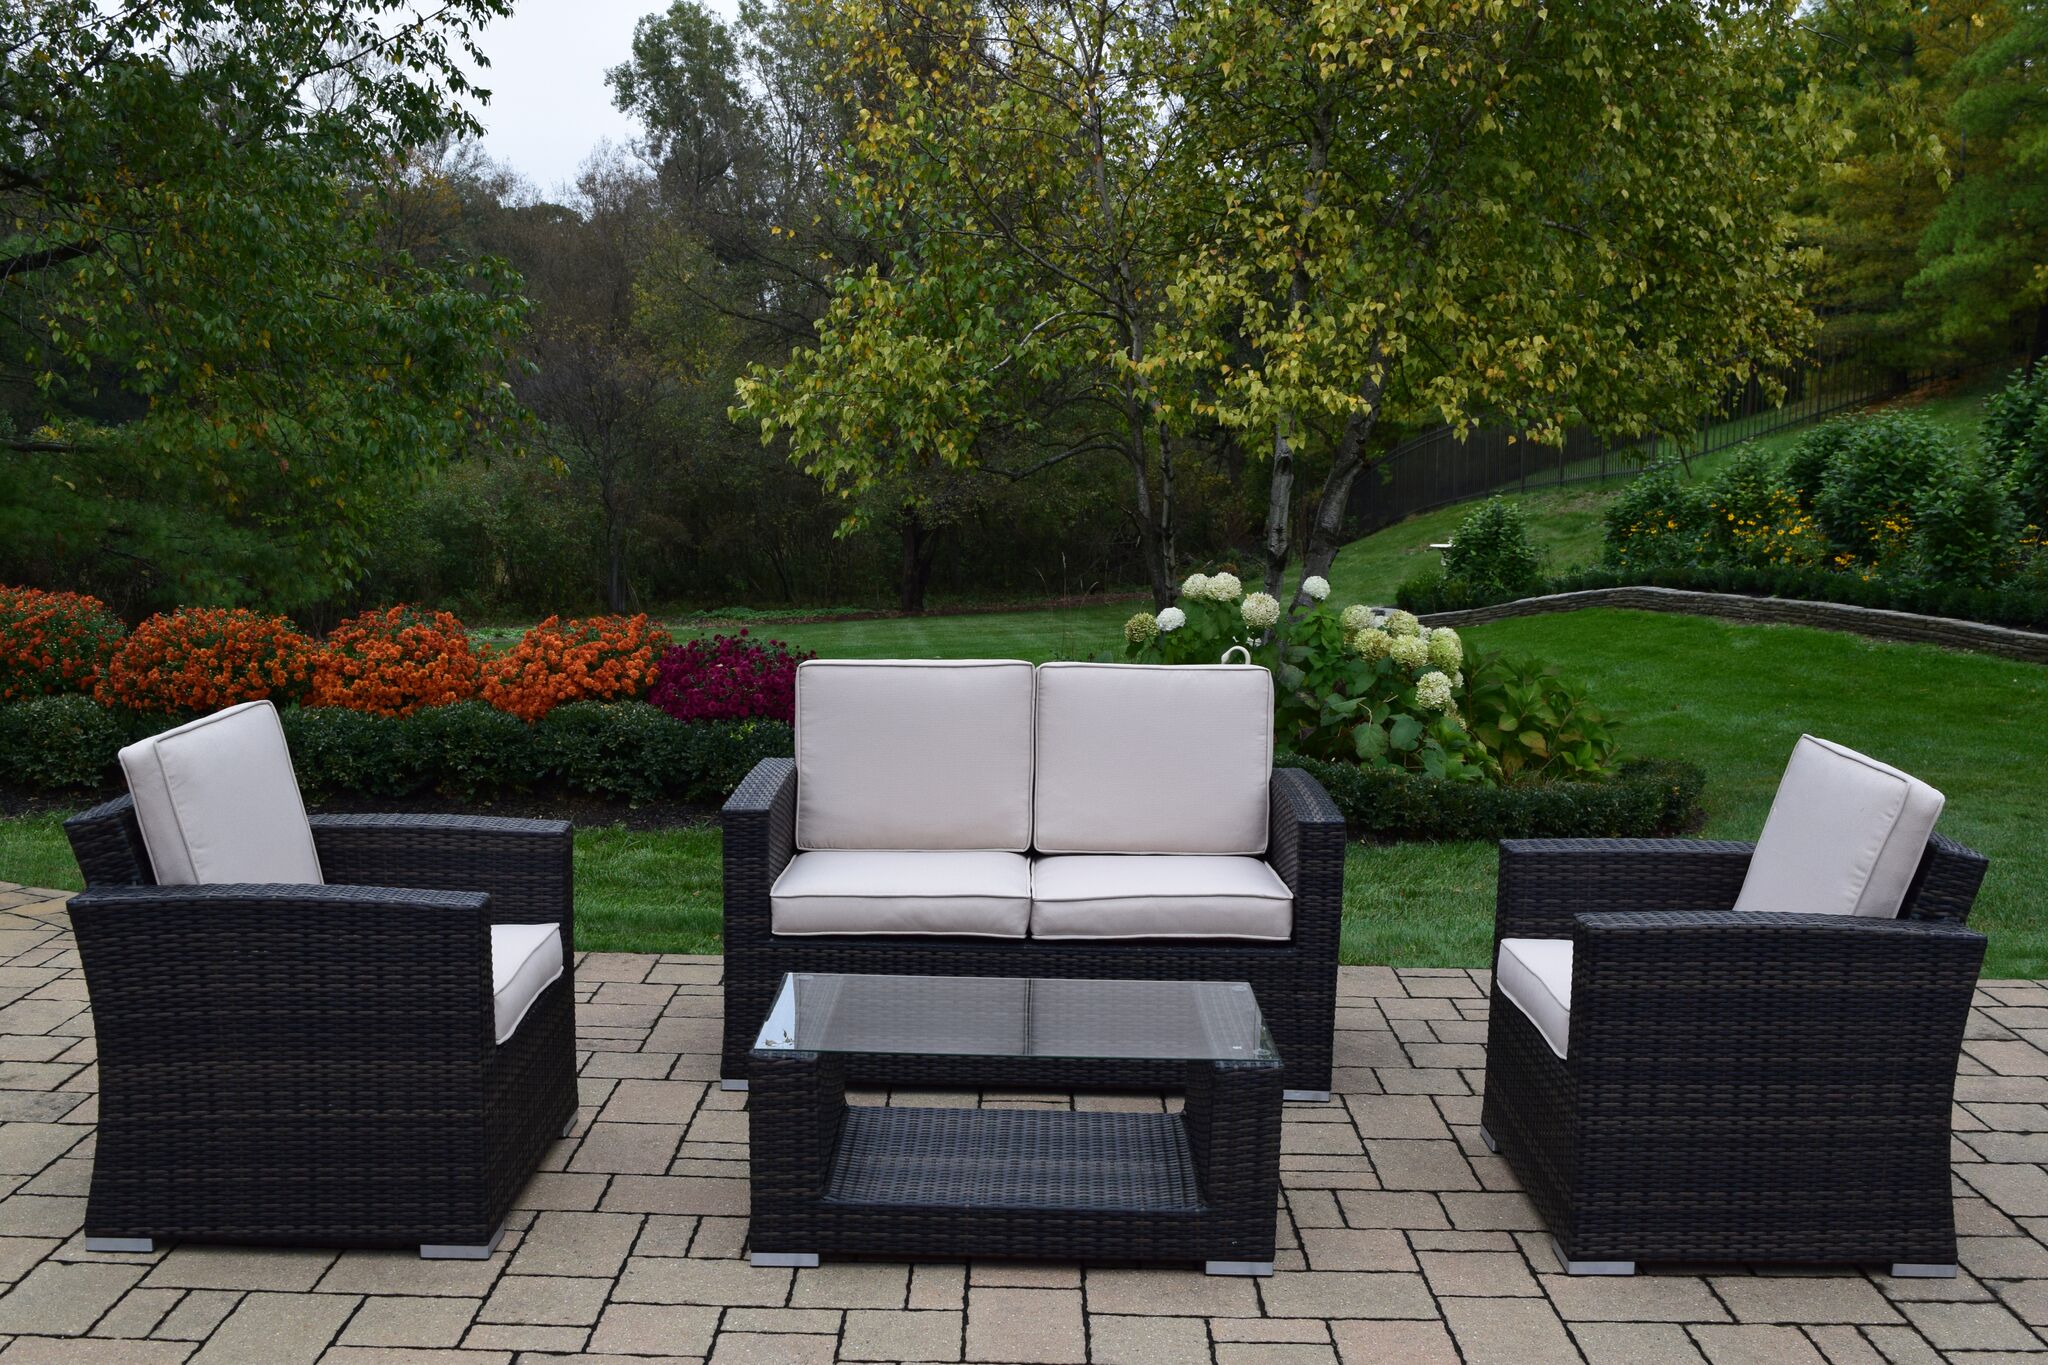 Outdoor Living and Style 4-Piece Black Resin Wicker Chat Set - Gray Cushions - image 1 of 3